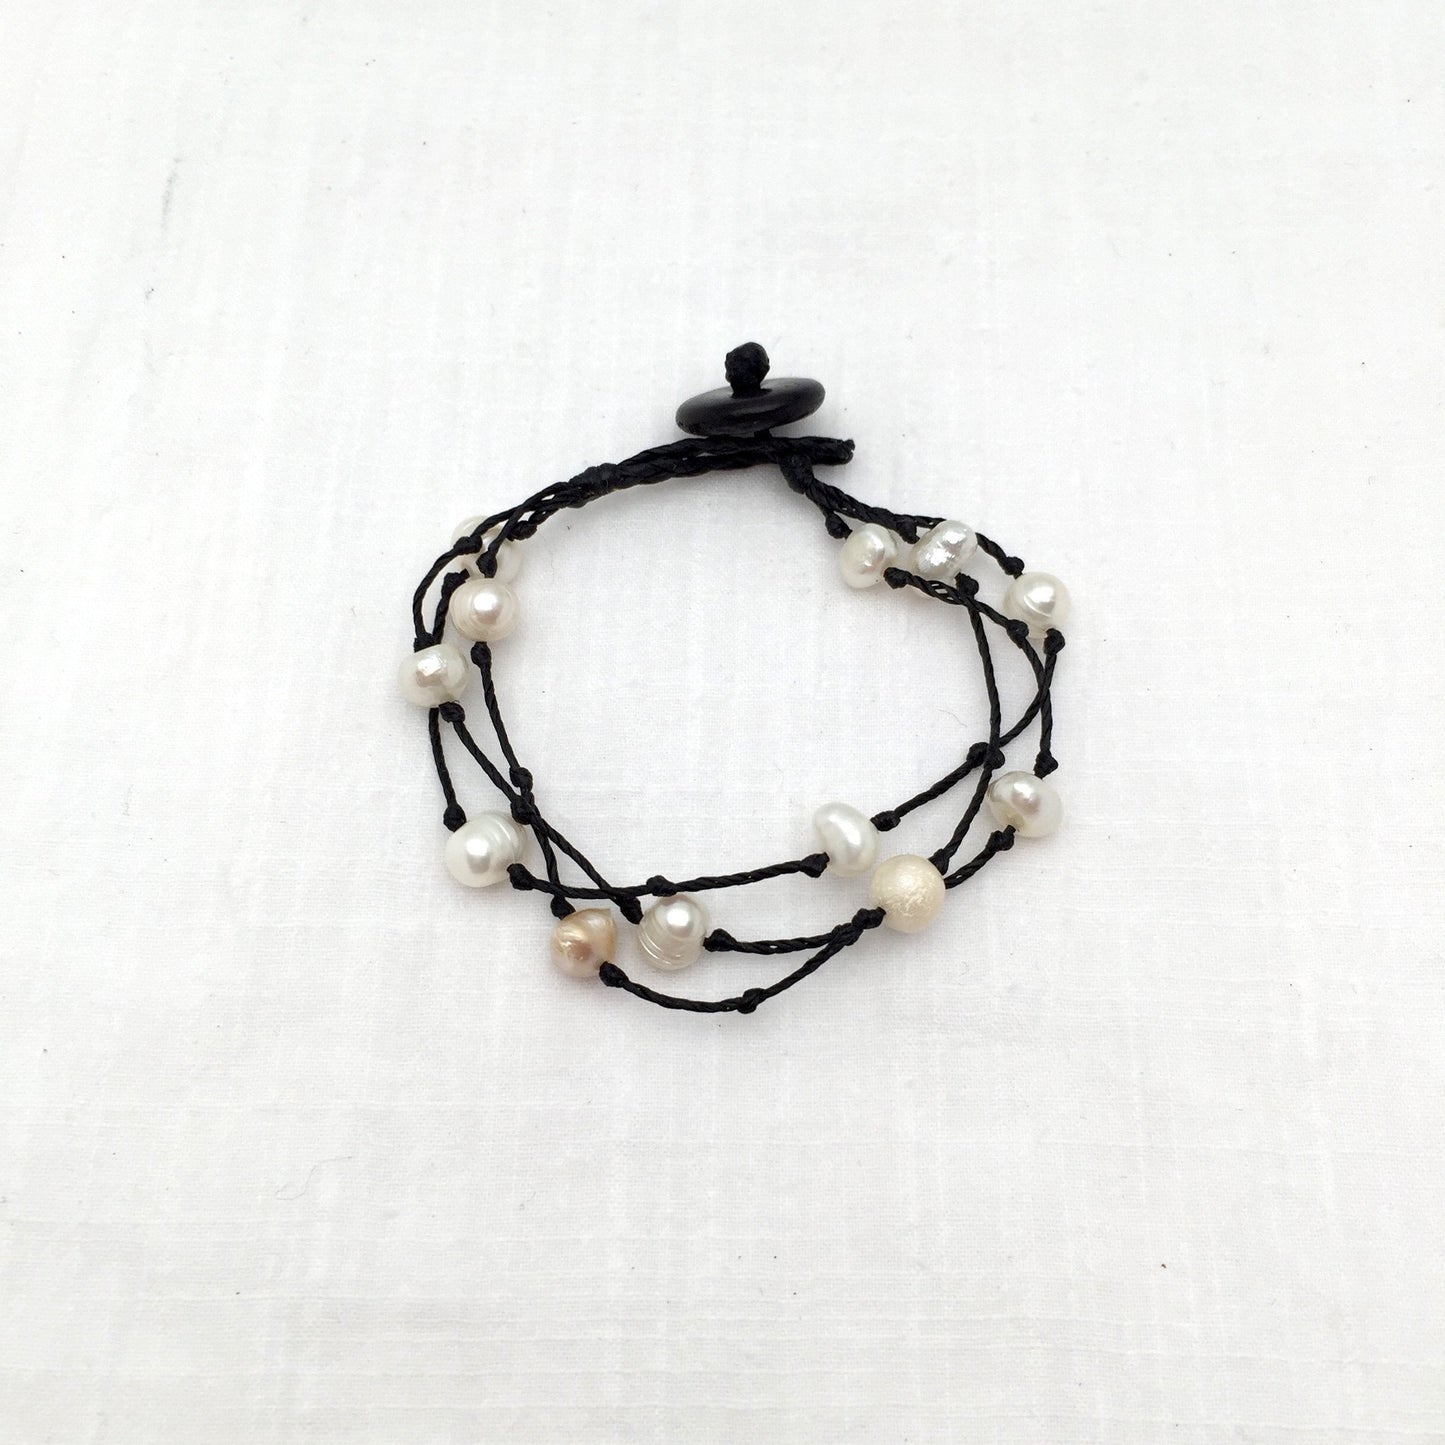 Maria knotted pearl bracelet - Abrazo Style Shop